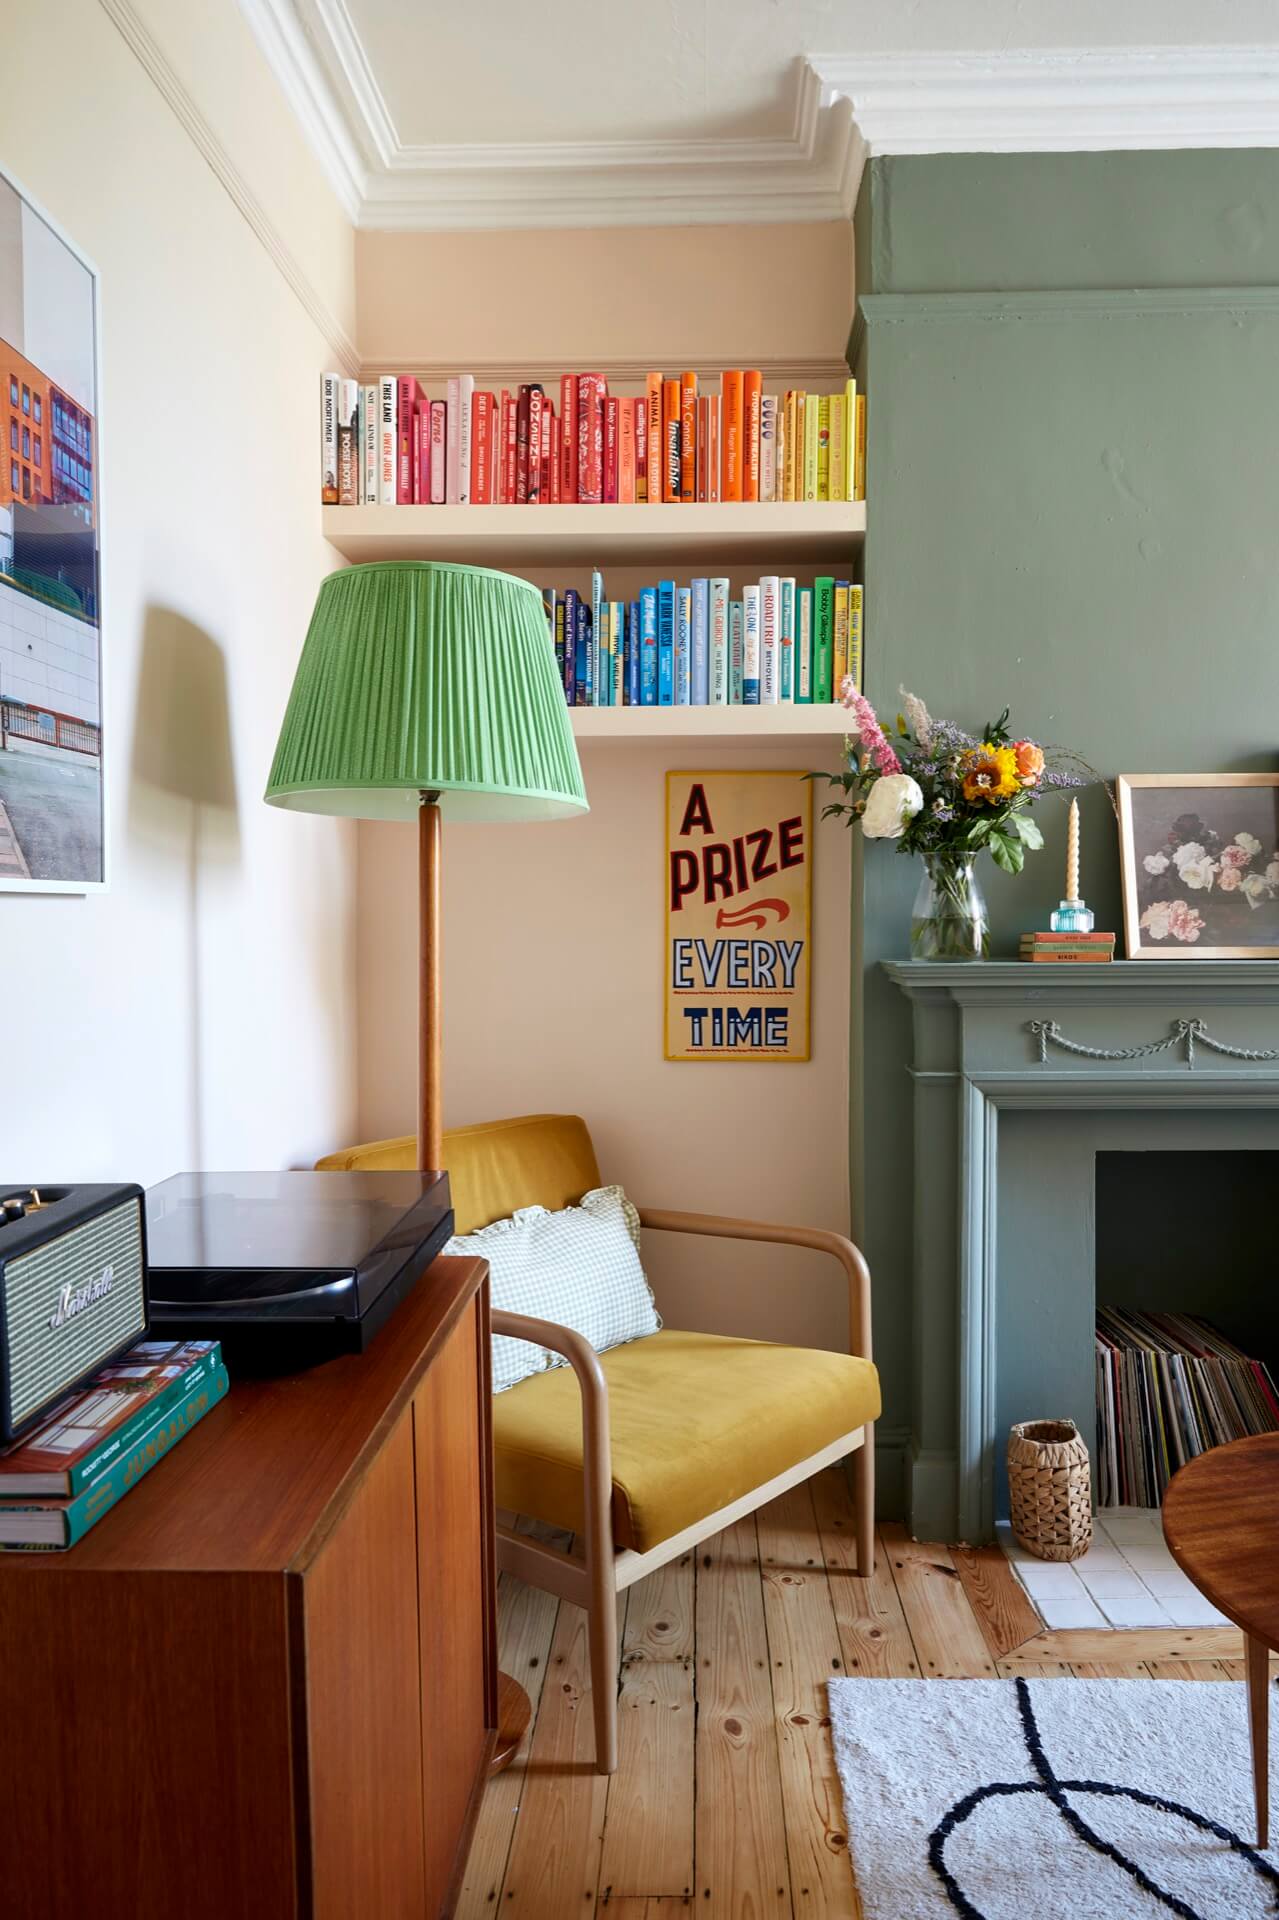 Living room with vintage finds and bookshelves filled with colour-coded books 